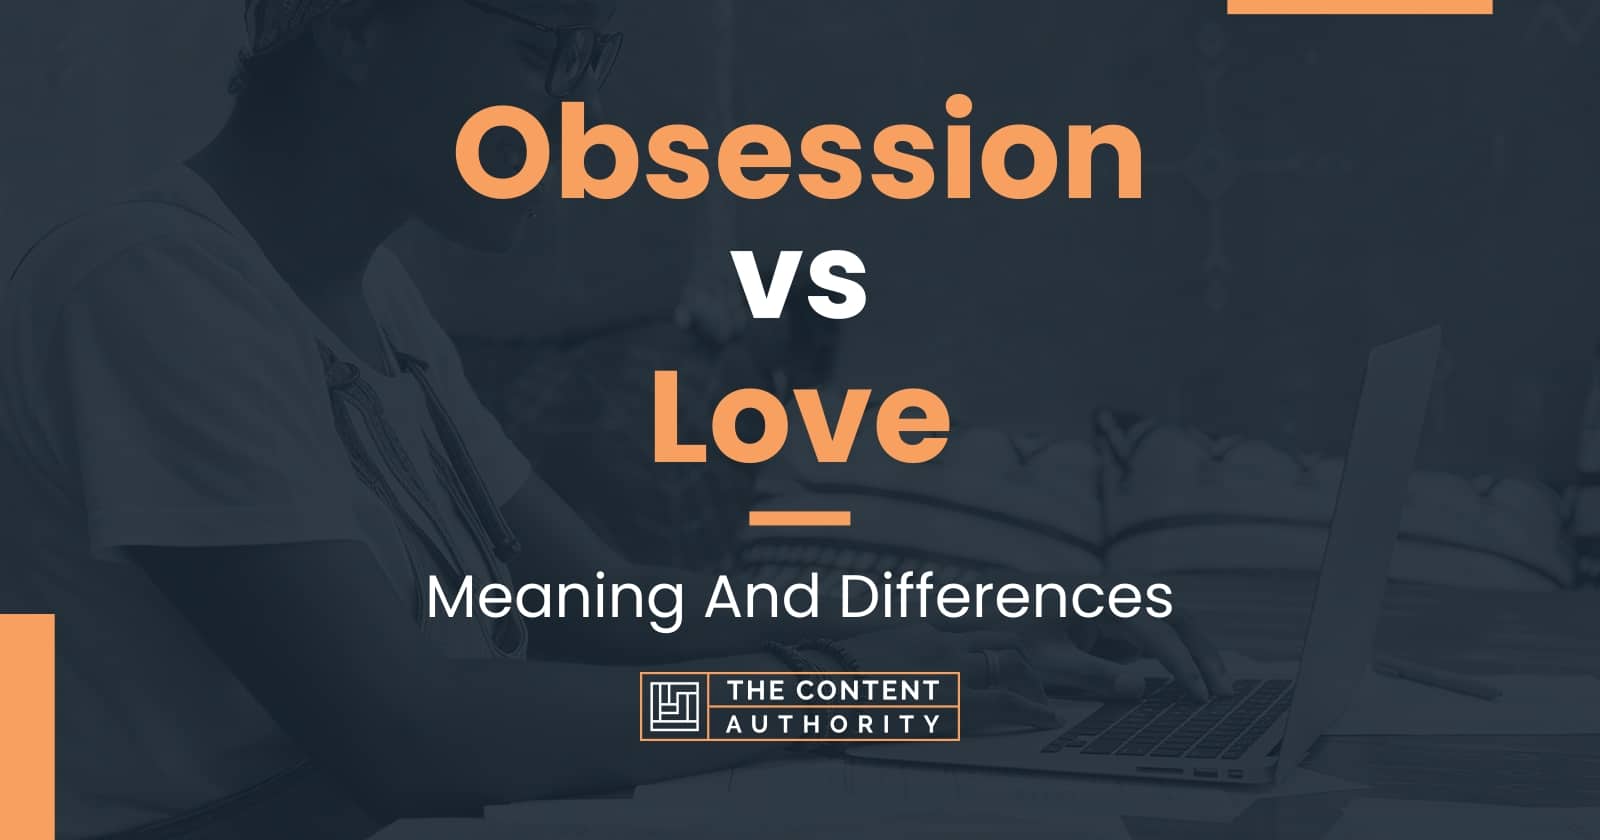 Obsession vs Love: Meaning And Differences